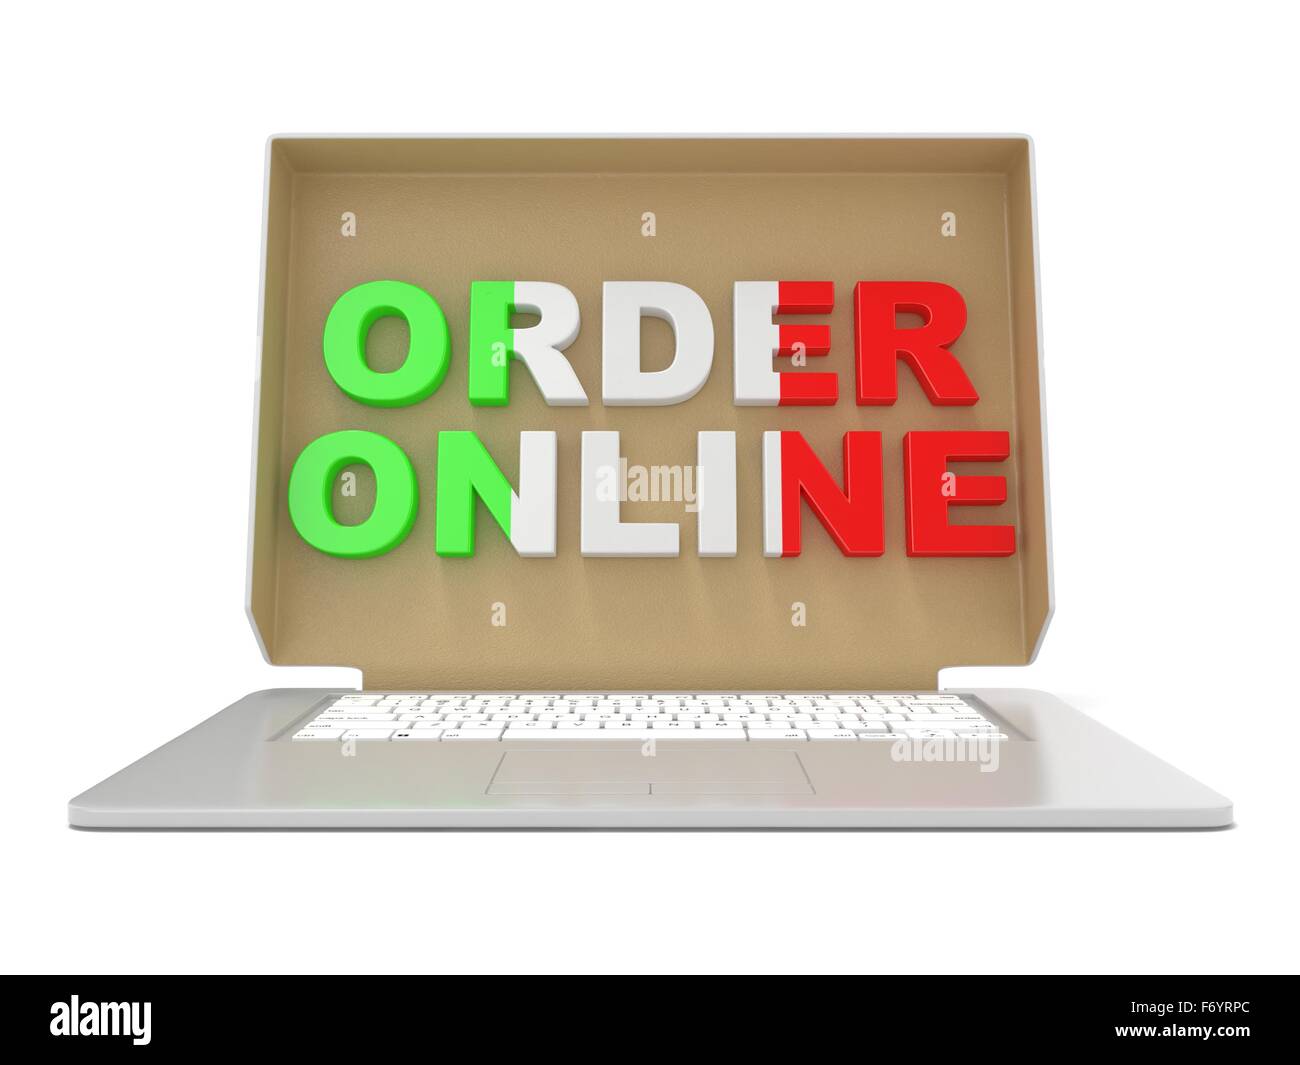 Order online - Italian food. Cardboard box cover on laptop. 3D render illustration isolated on white background Stock Photo